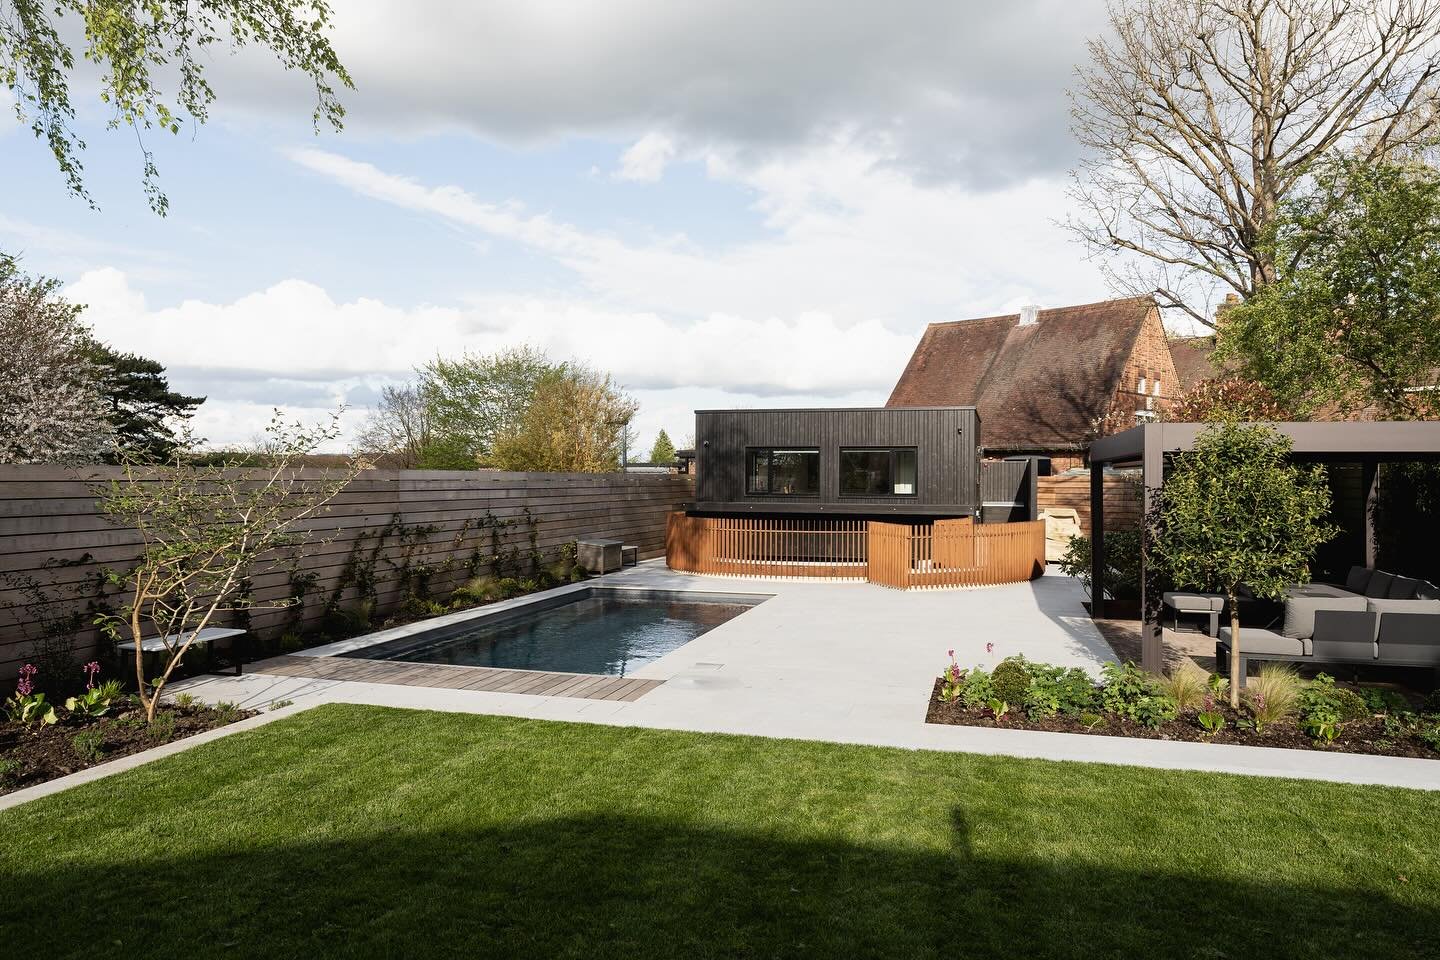 A few shots of a garden we have just completed in Sevenoaks&hellip; full in-house design and build covering all elements from start to finish&hellip; fantastic scheme with so many amazing materials&hellip; can&rsquo;t wait to see this when the planti